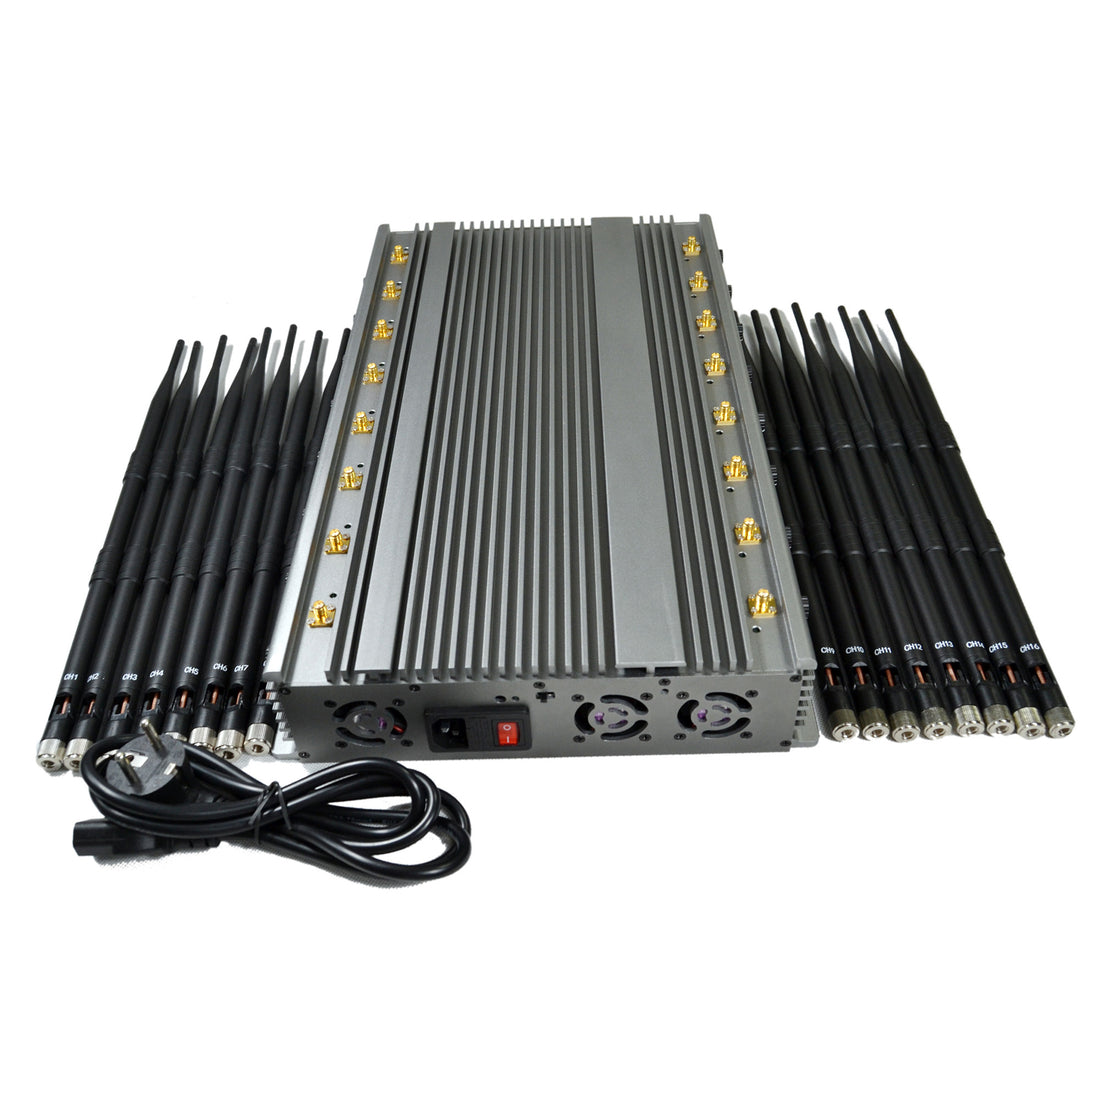 After the mobile phone signal jammer is turned on, it interferes with the campus broadcast. How should I solve it?